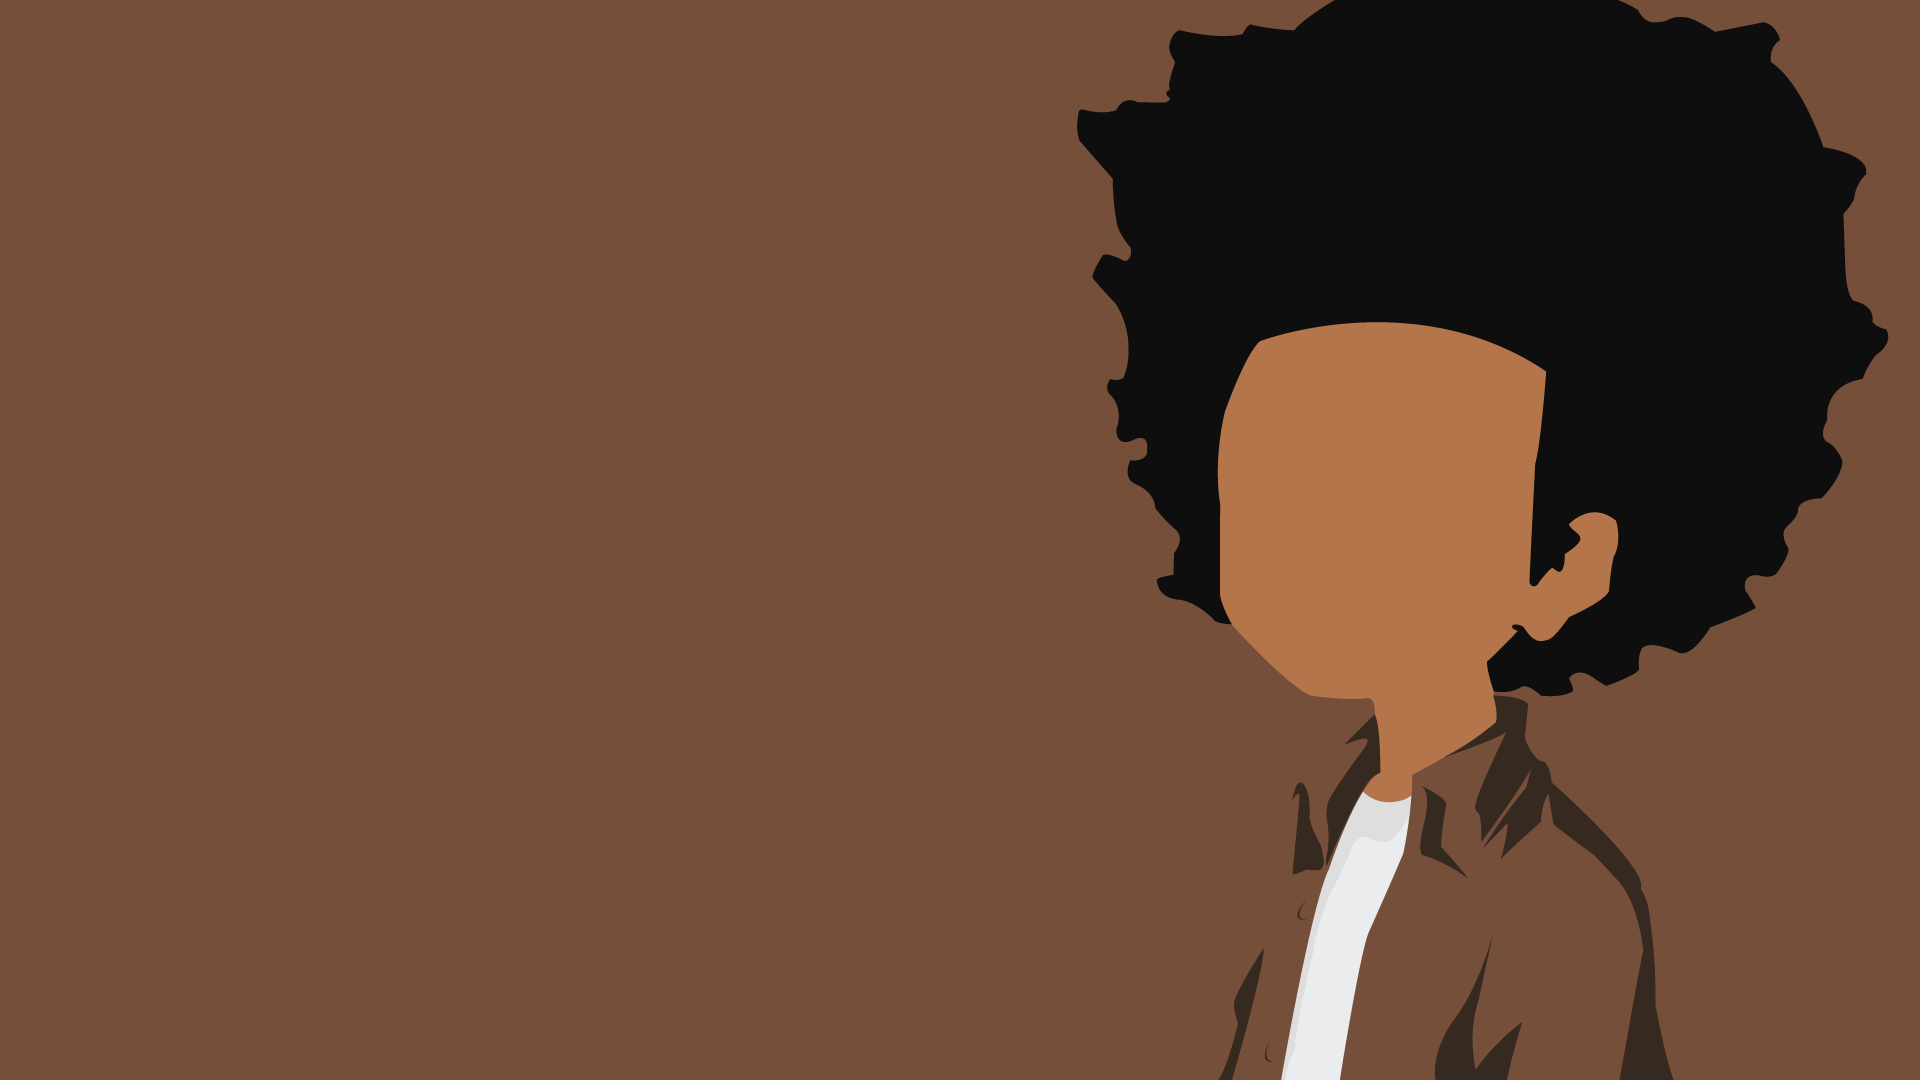 Boondocks Wallpapers On Wallpaperdog Weve gathered more than 3 million images uploaded by our users and sorted them by the most popular ones. boondocks wallpapers on wallpaperdog